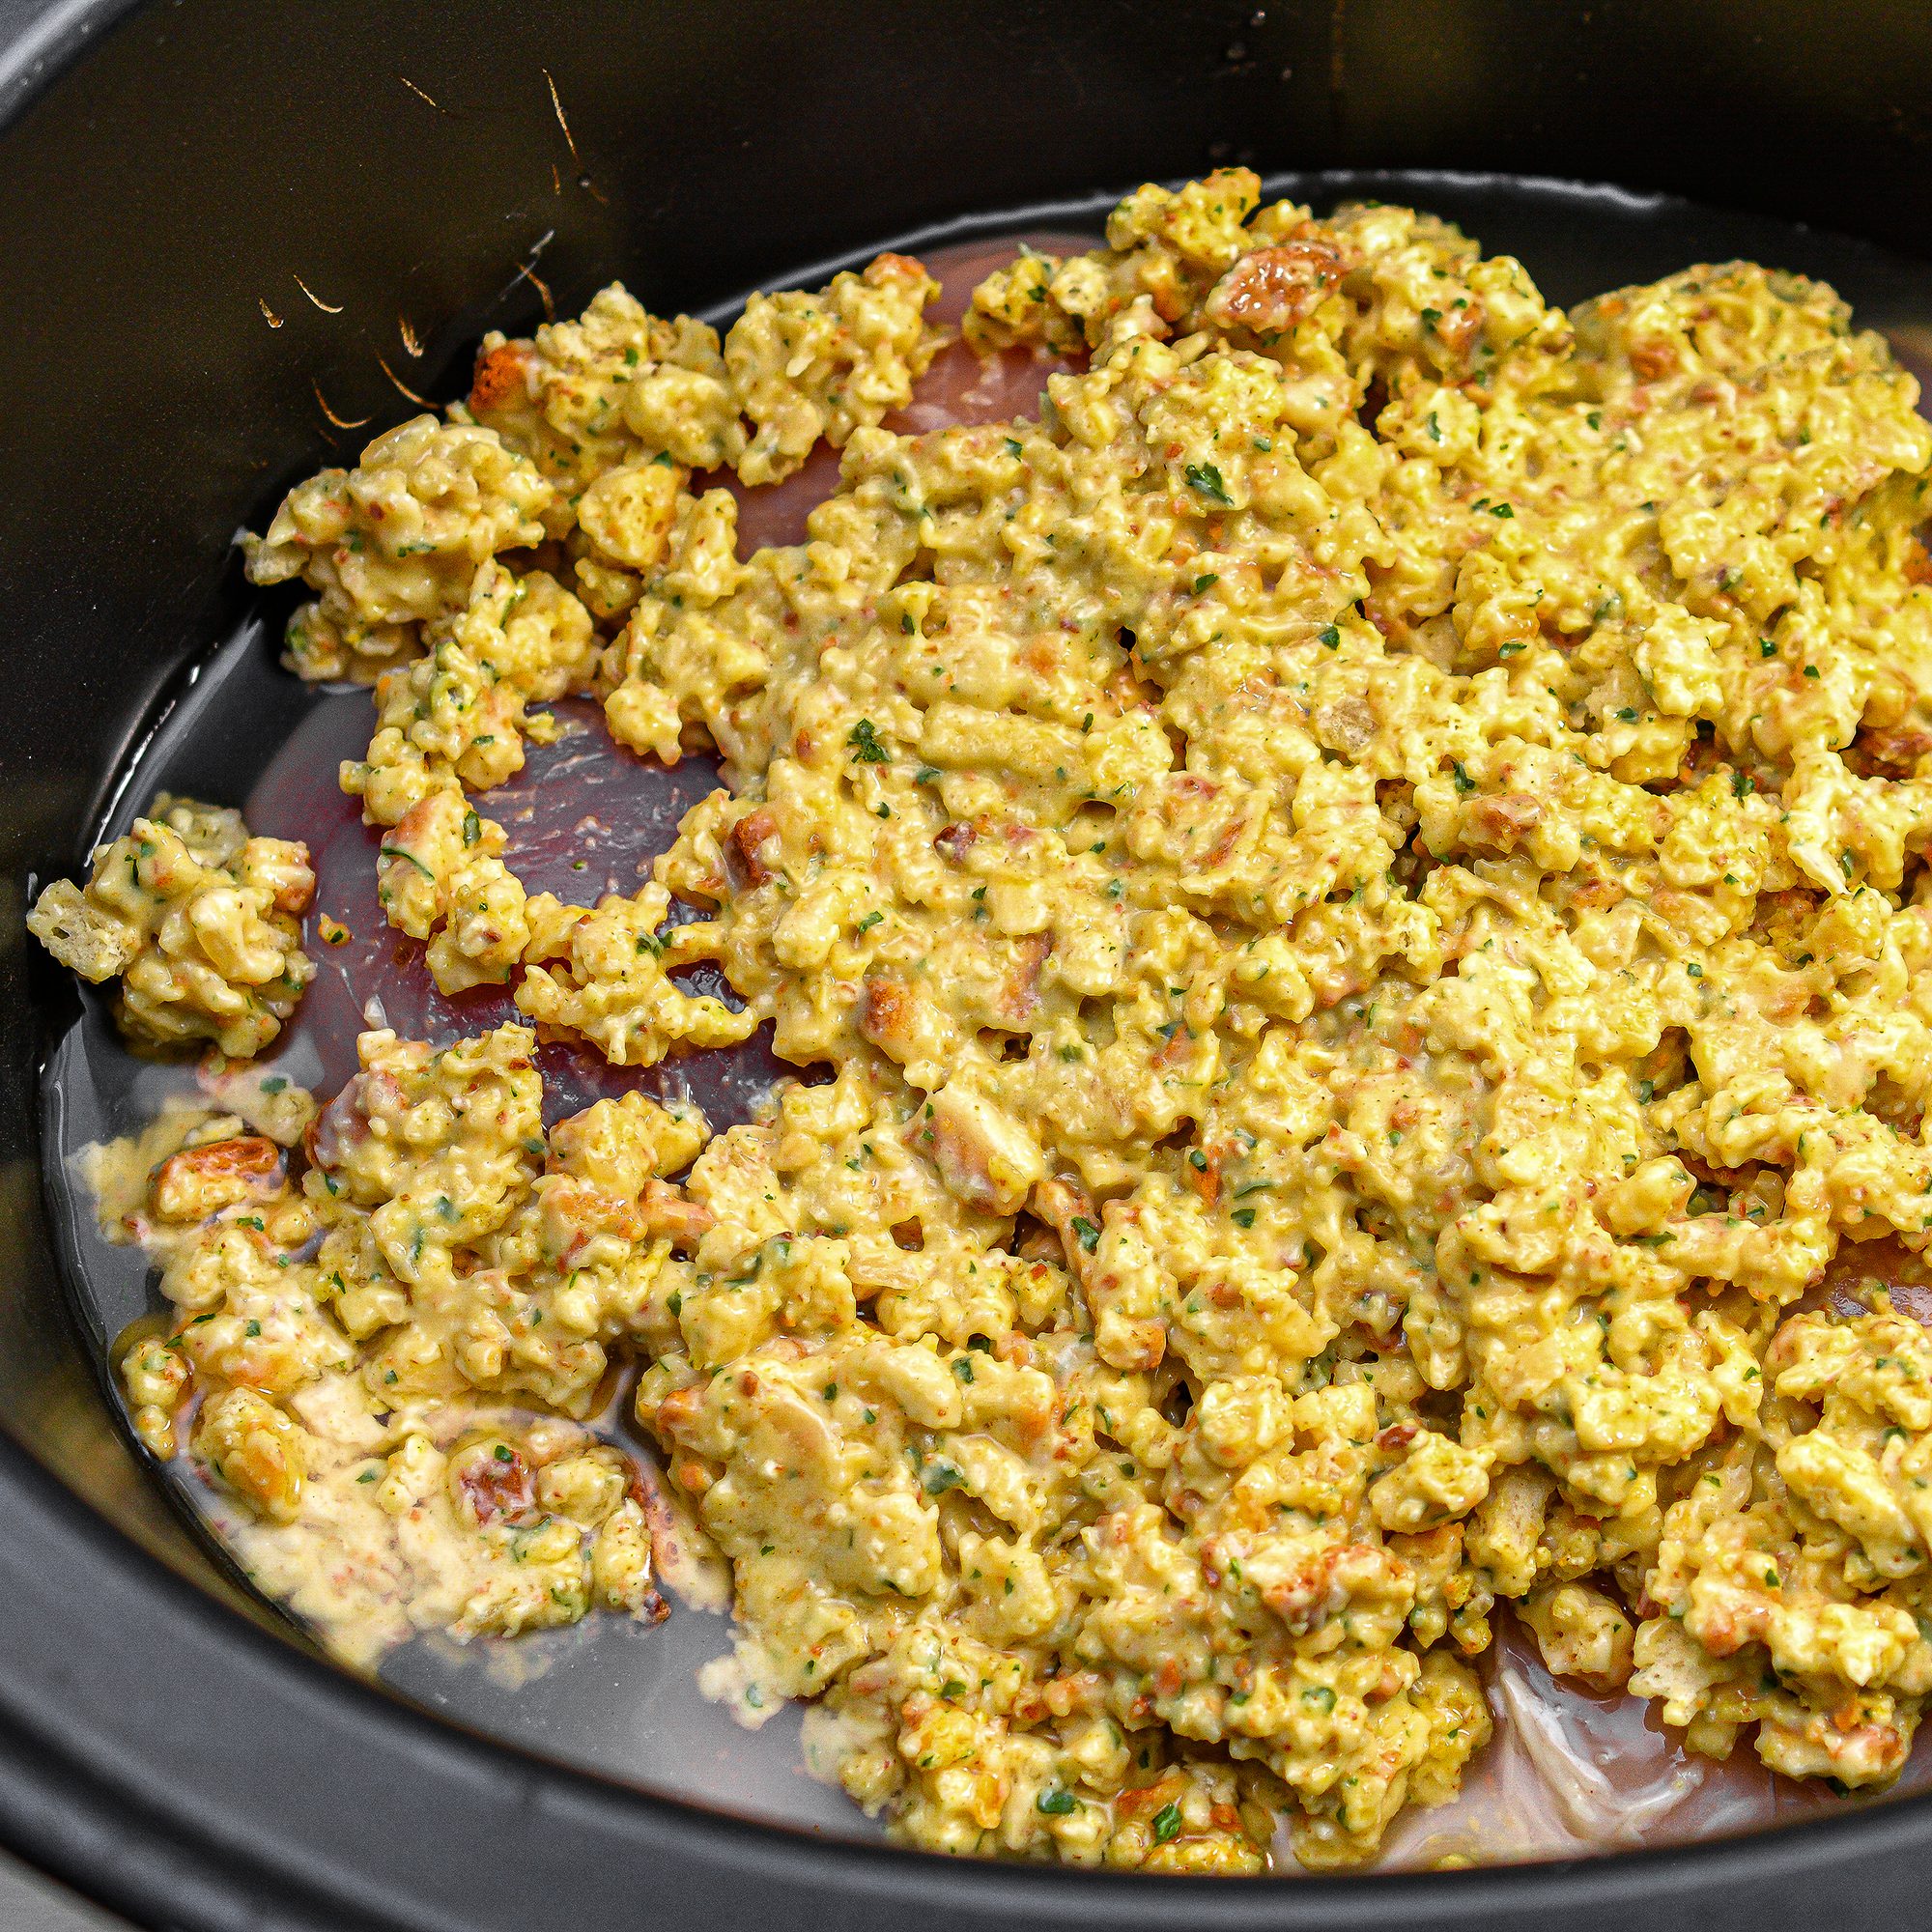 Spread the stuffing mixture over the chicken in the slow cooker.